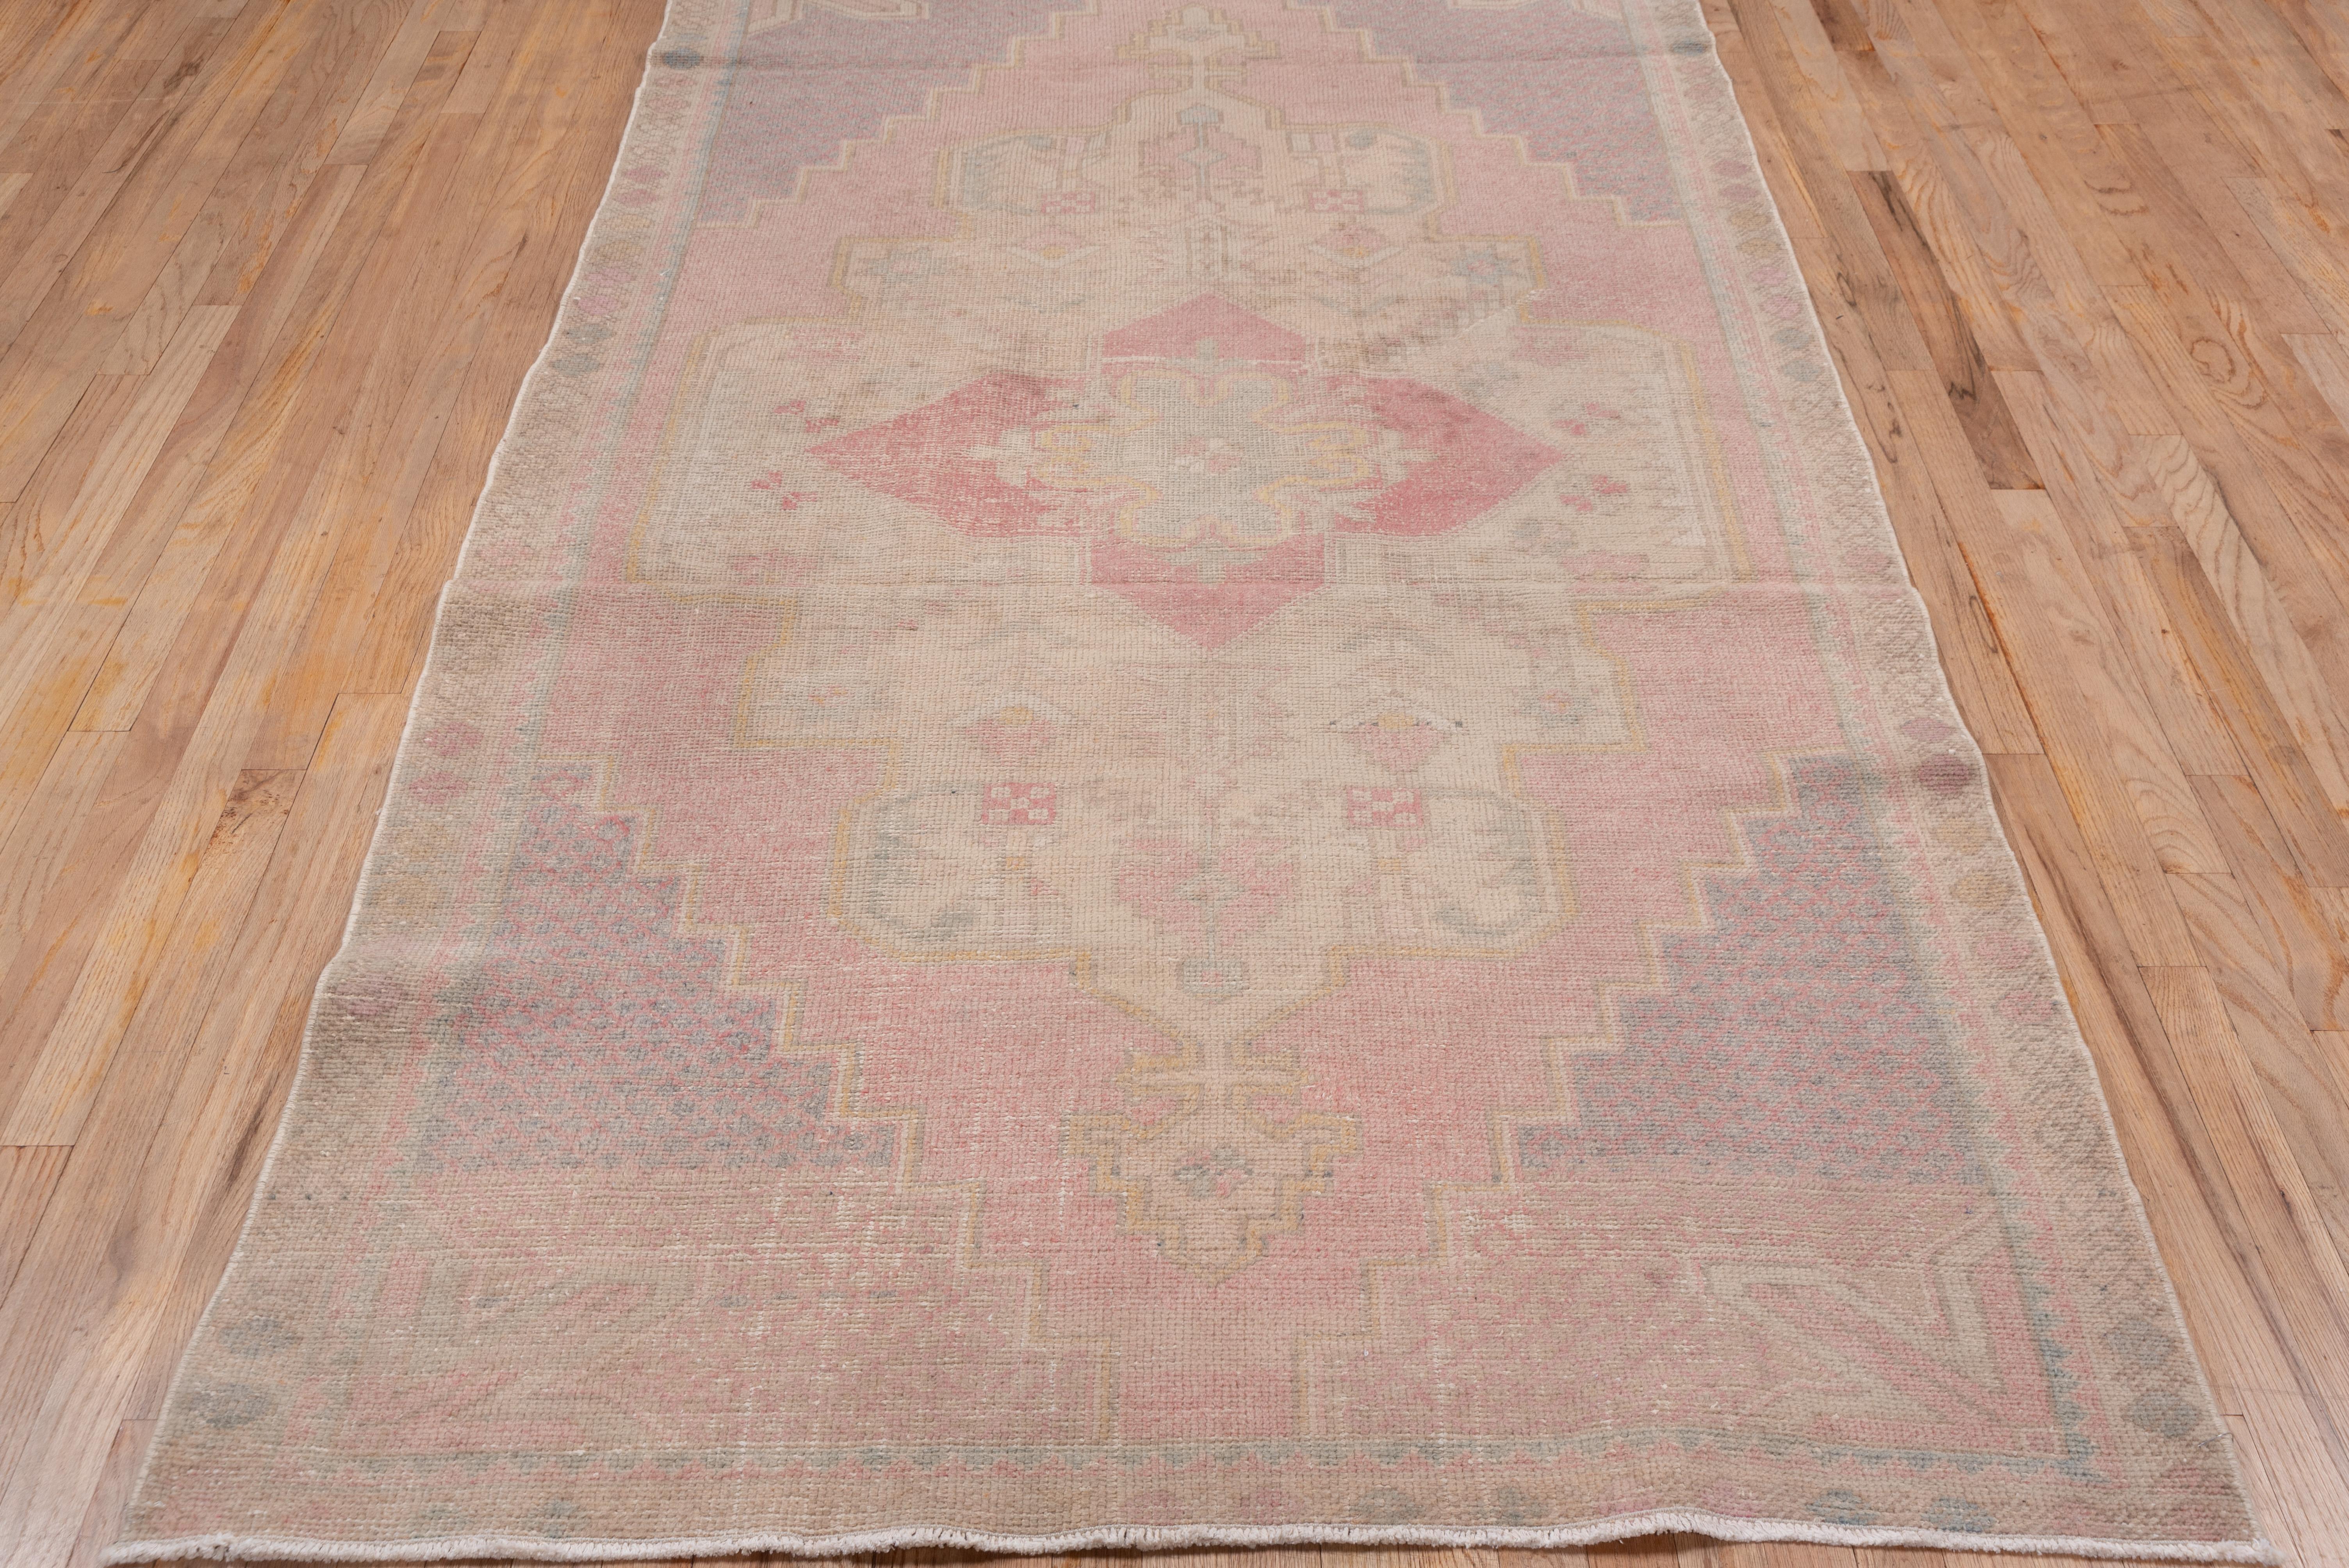 Vintage Oushak Rug with Pink Purple and Ivory Field, Pastel Colors, Shabby Chic In Good Condition For Sale In New York, NY